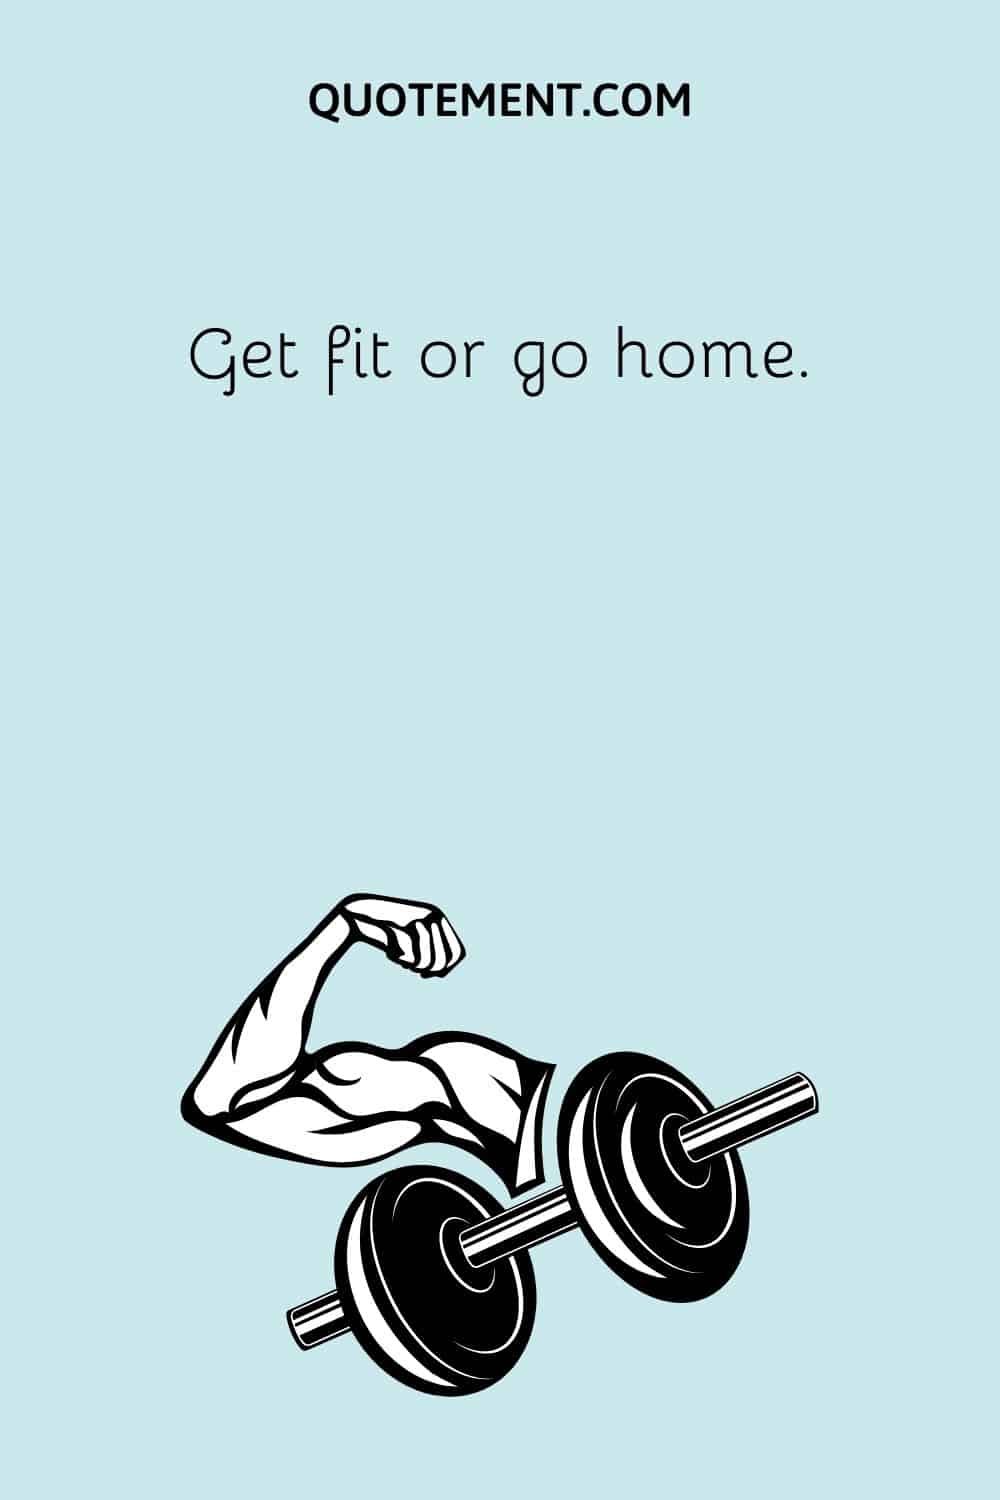 Get fit or go home.